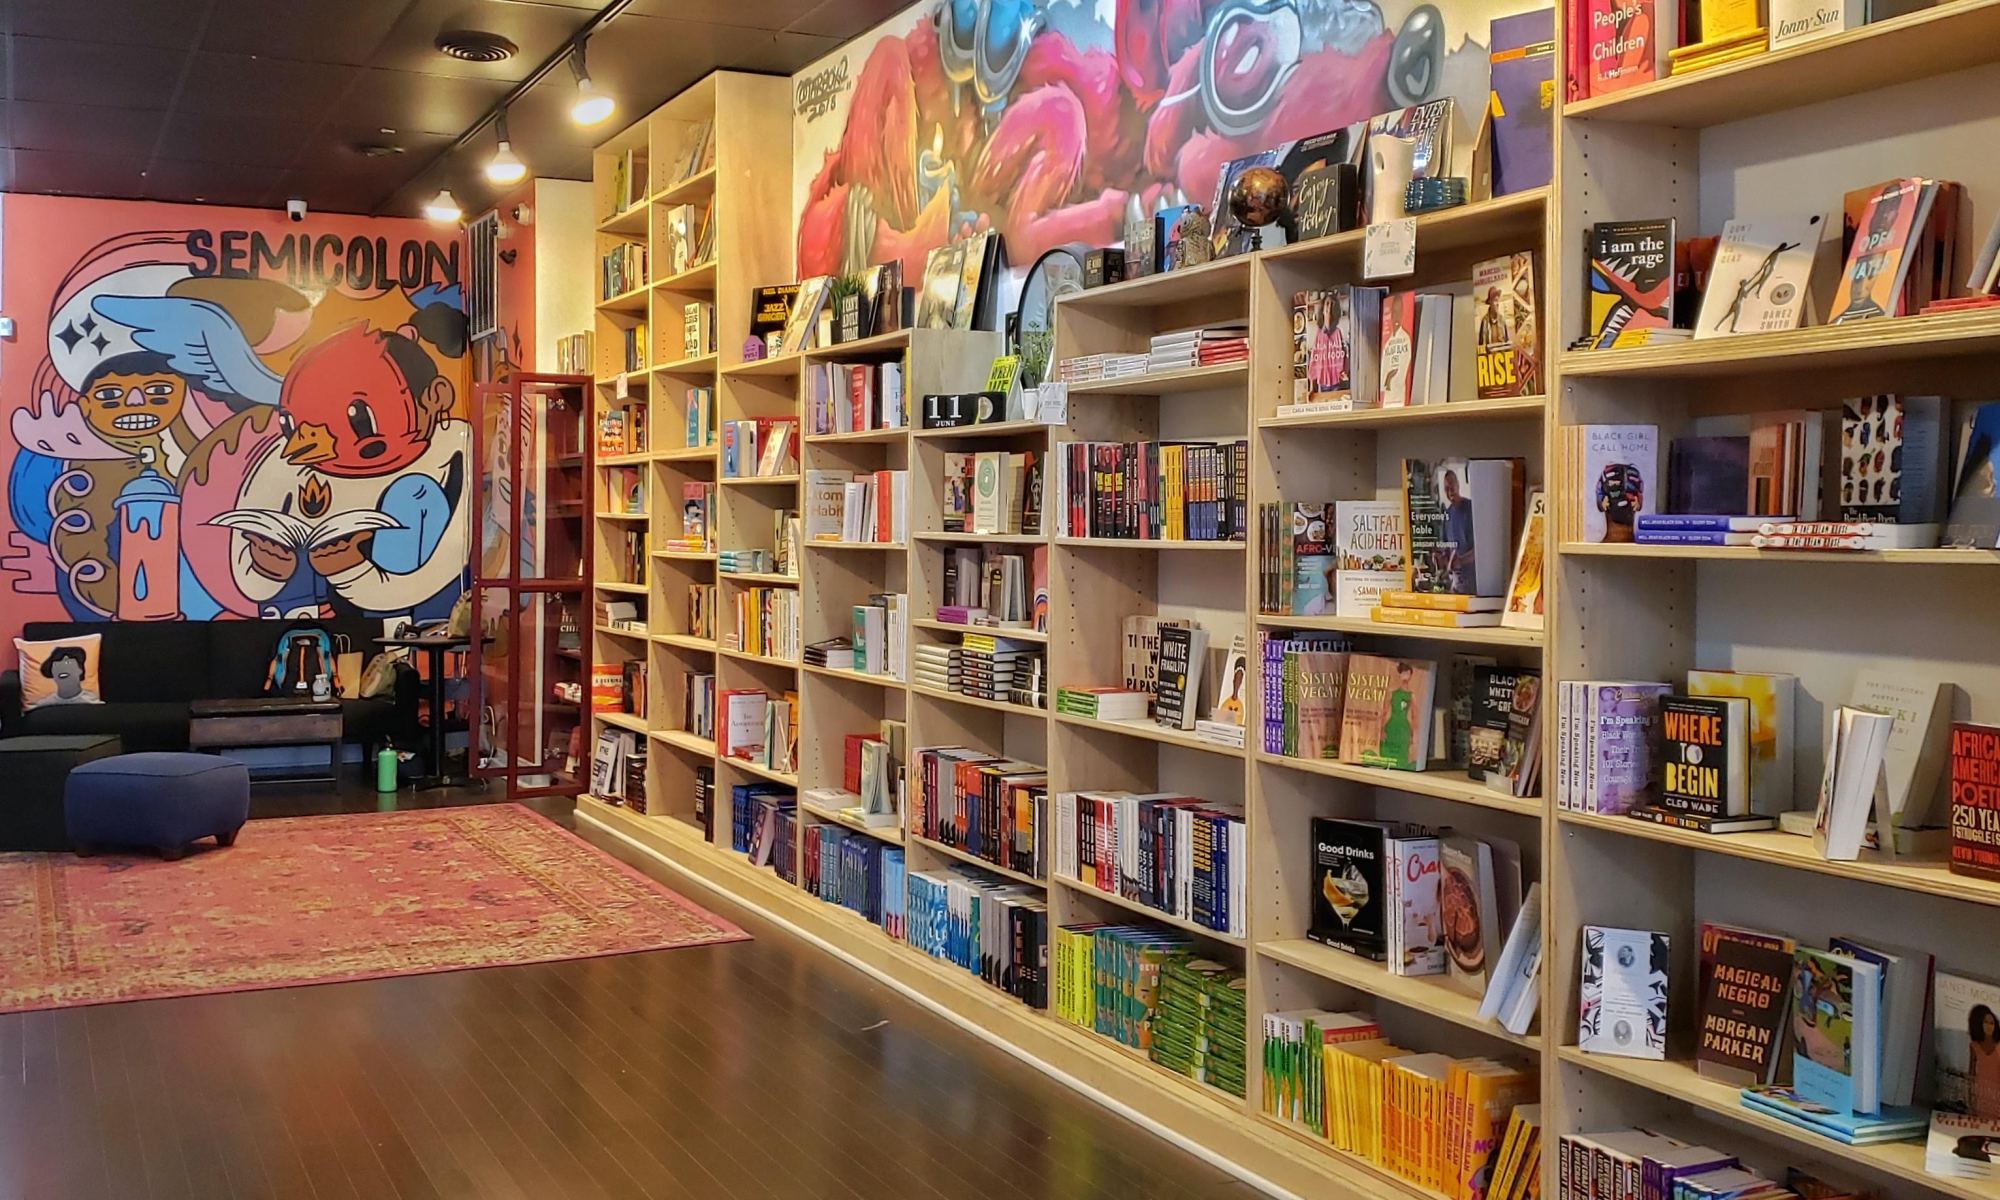 The inside of a bookstore, with the wall to the right covered in books and the far back wall featuring artwork.